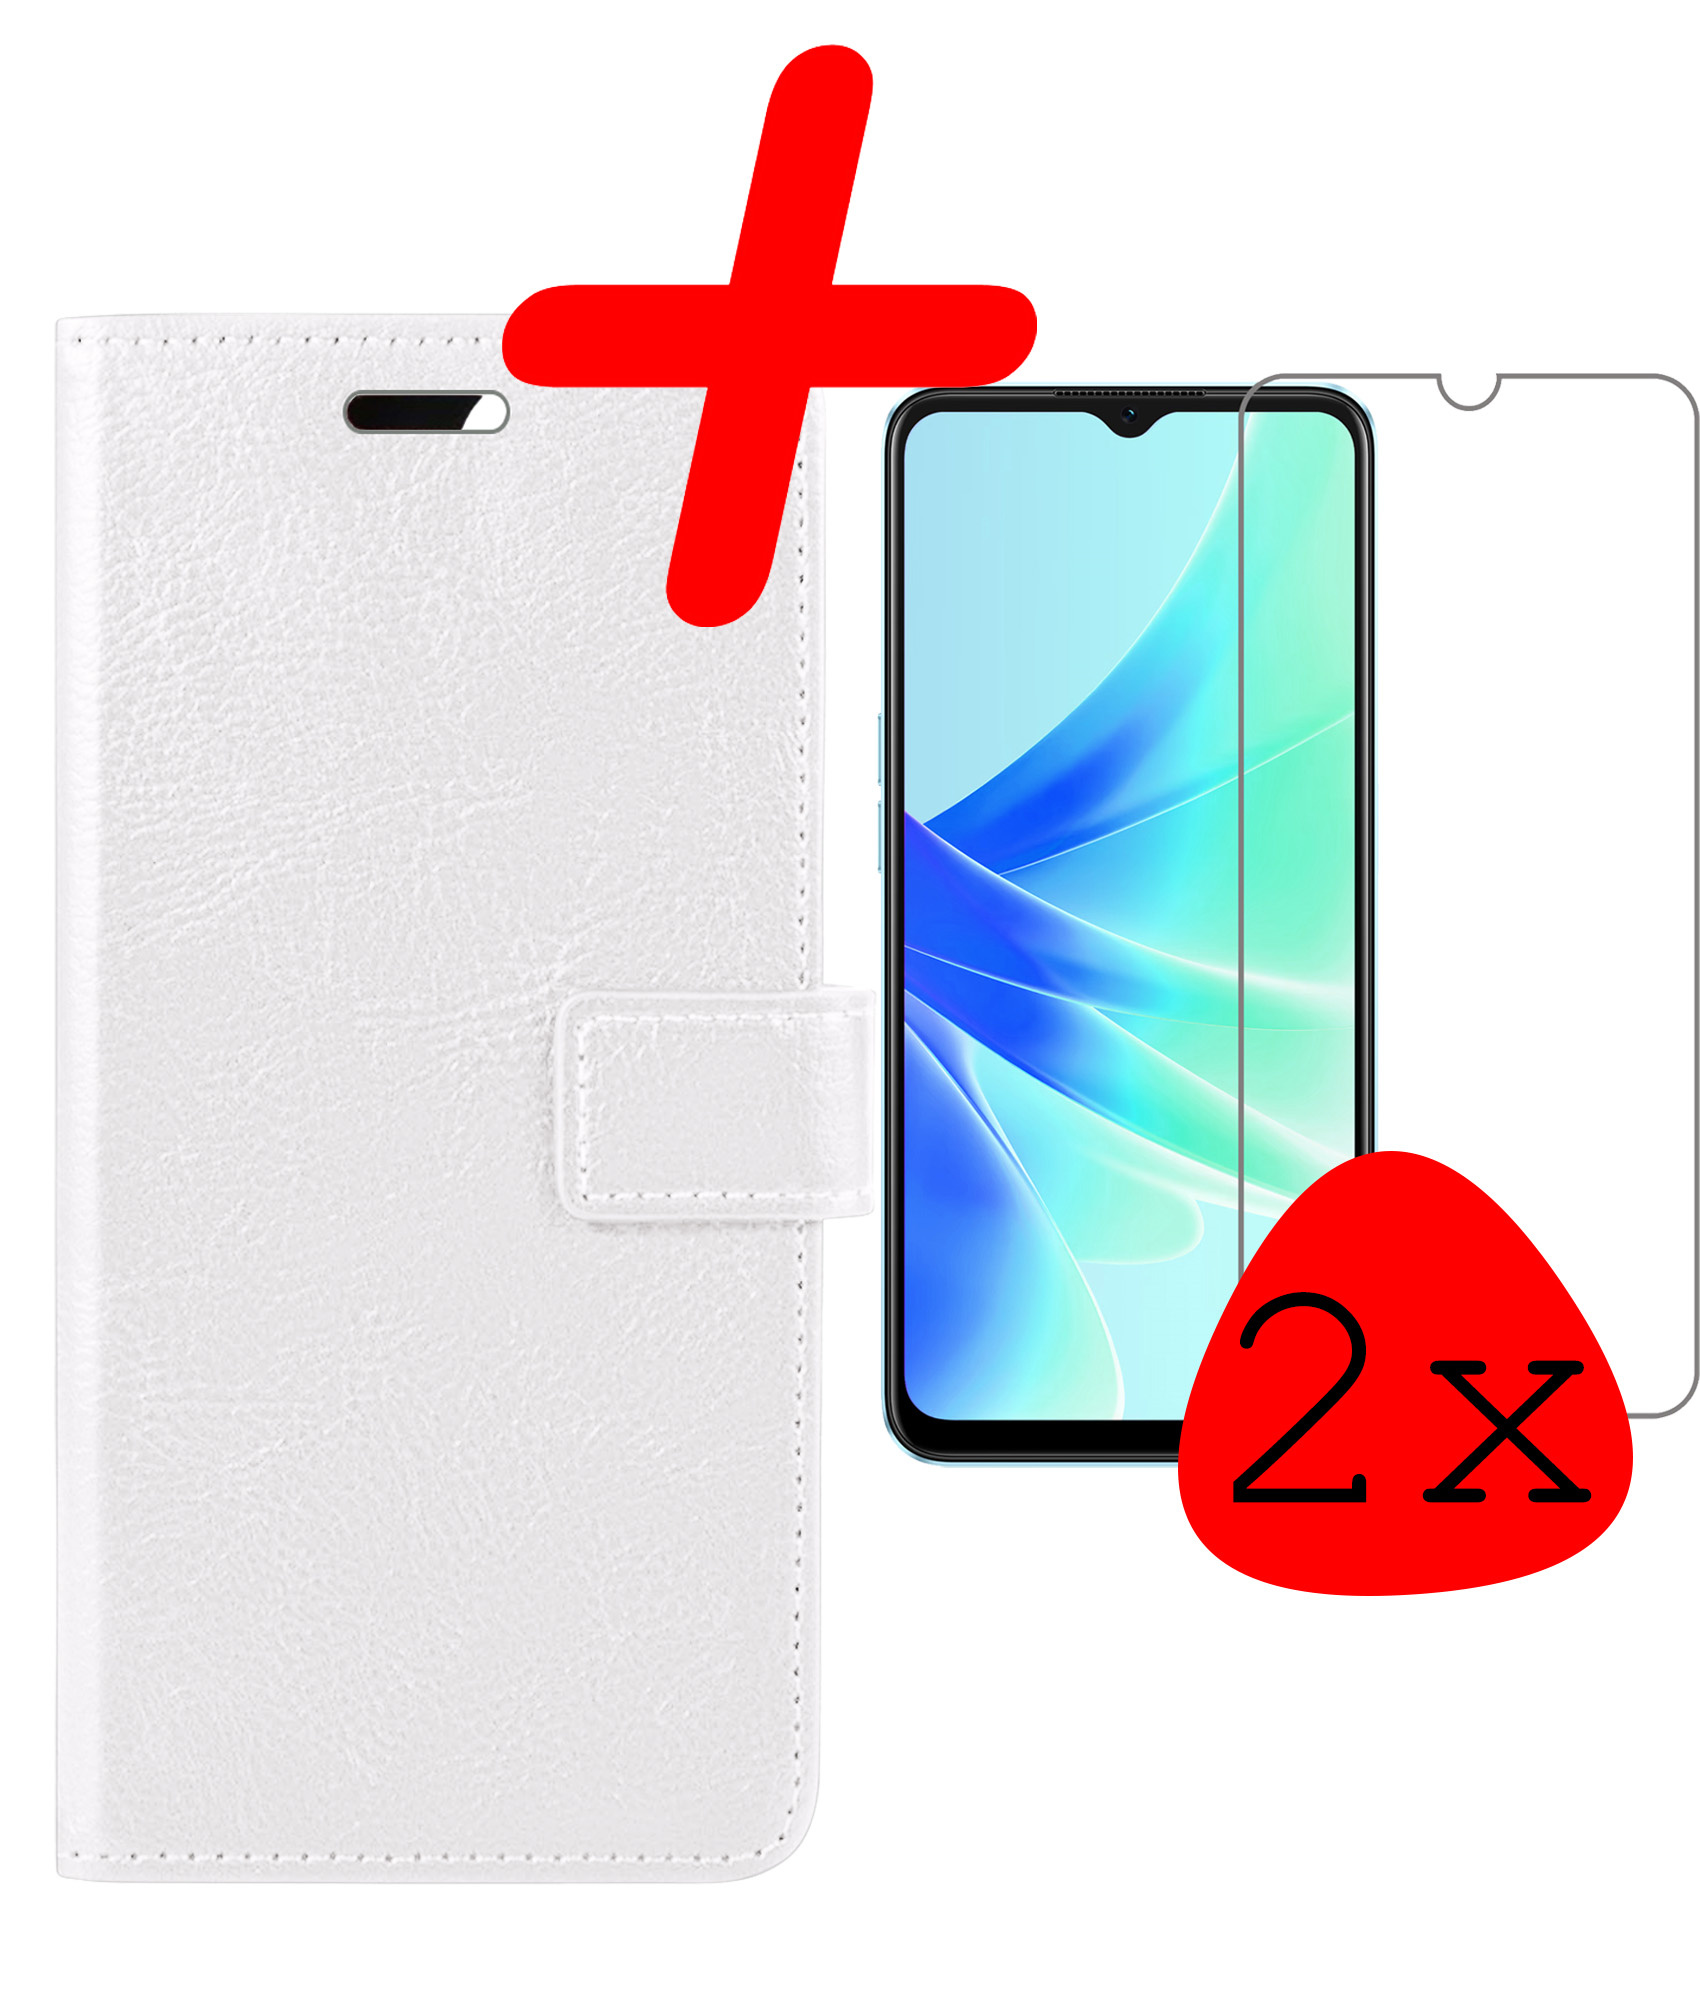 BASEY. OPPO A17 Hoesje Bookcase Hoes Flip Case Book Cover 2x Met Screenprotector - OPPO A17 Hoes Book Case Hoesje - Wit